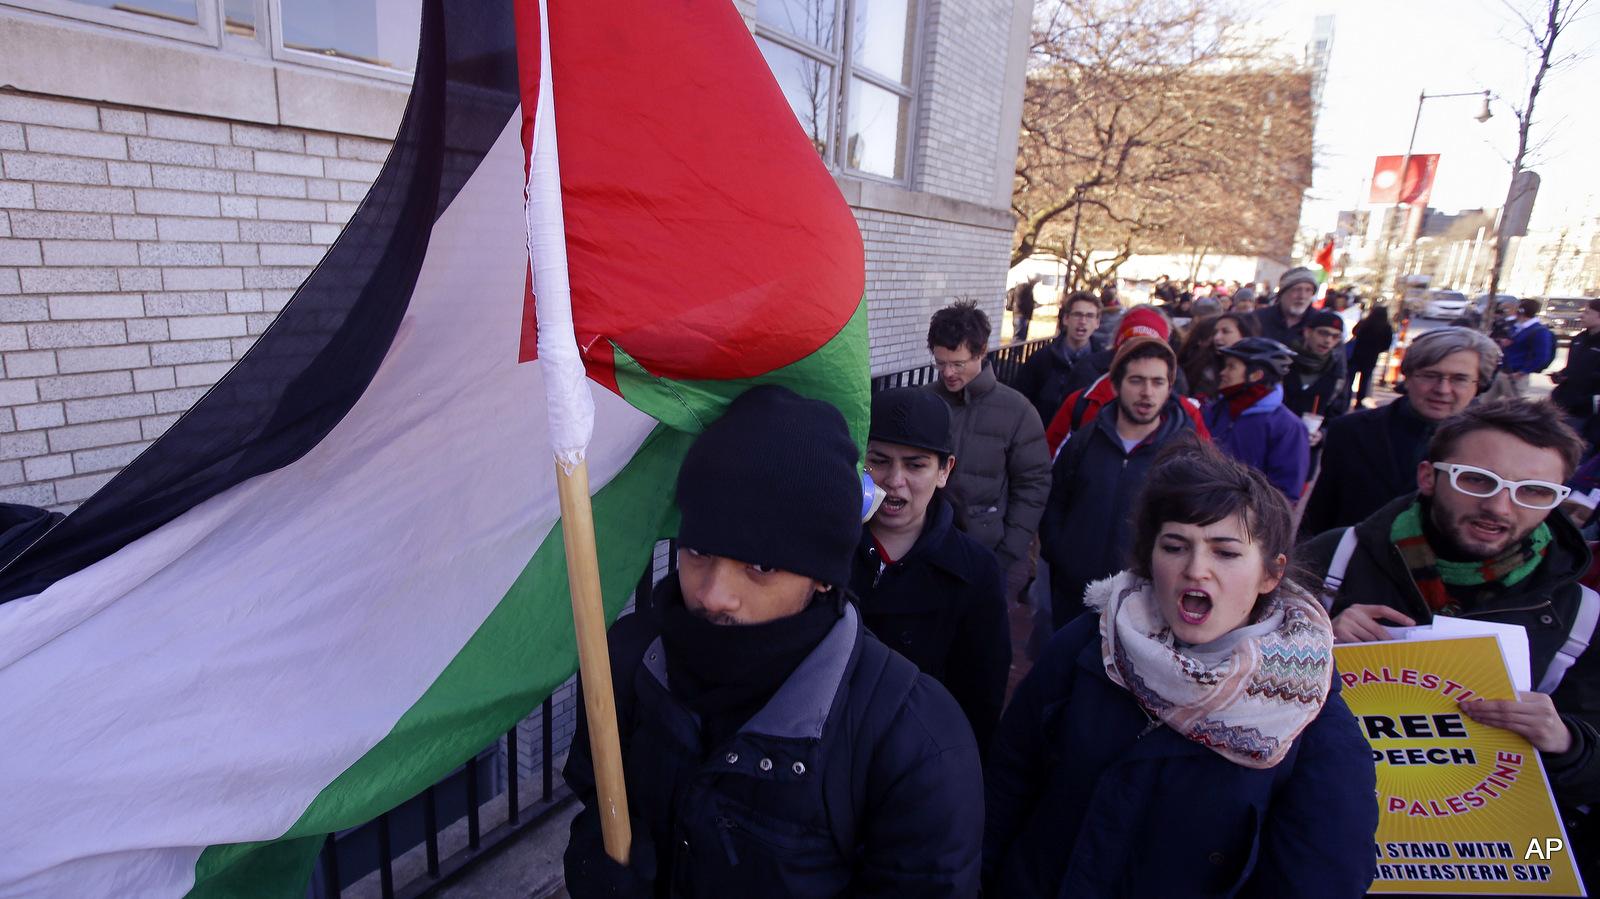 A Northeastern University student choosing not to give his name carries a Palestinian flag during a protest in support of Palestine after a Northeastern University student organization, Students for Justice in Palestine